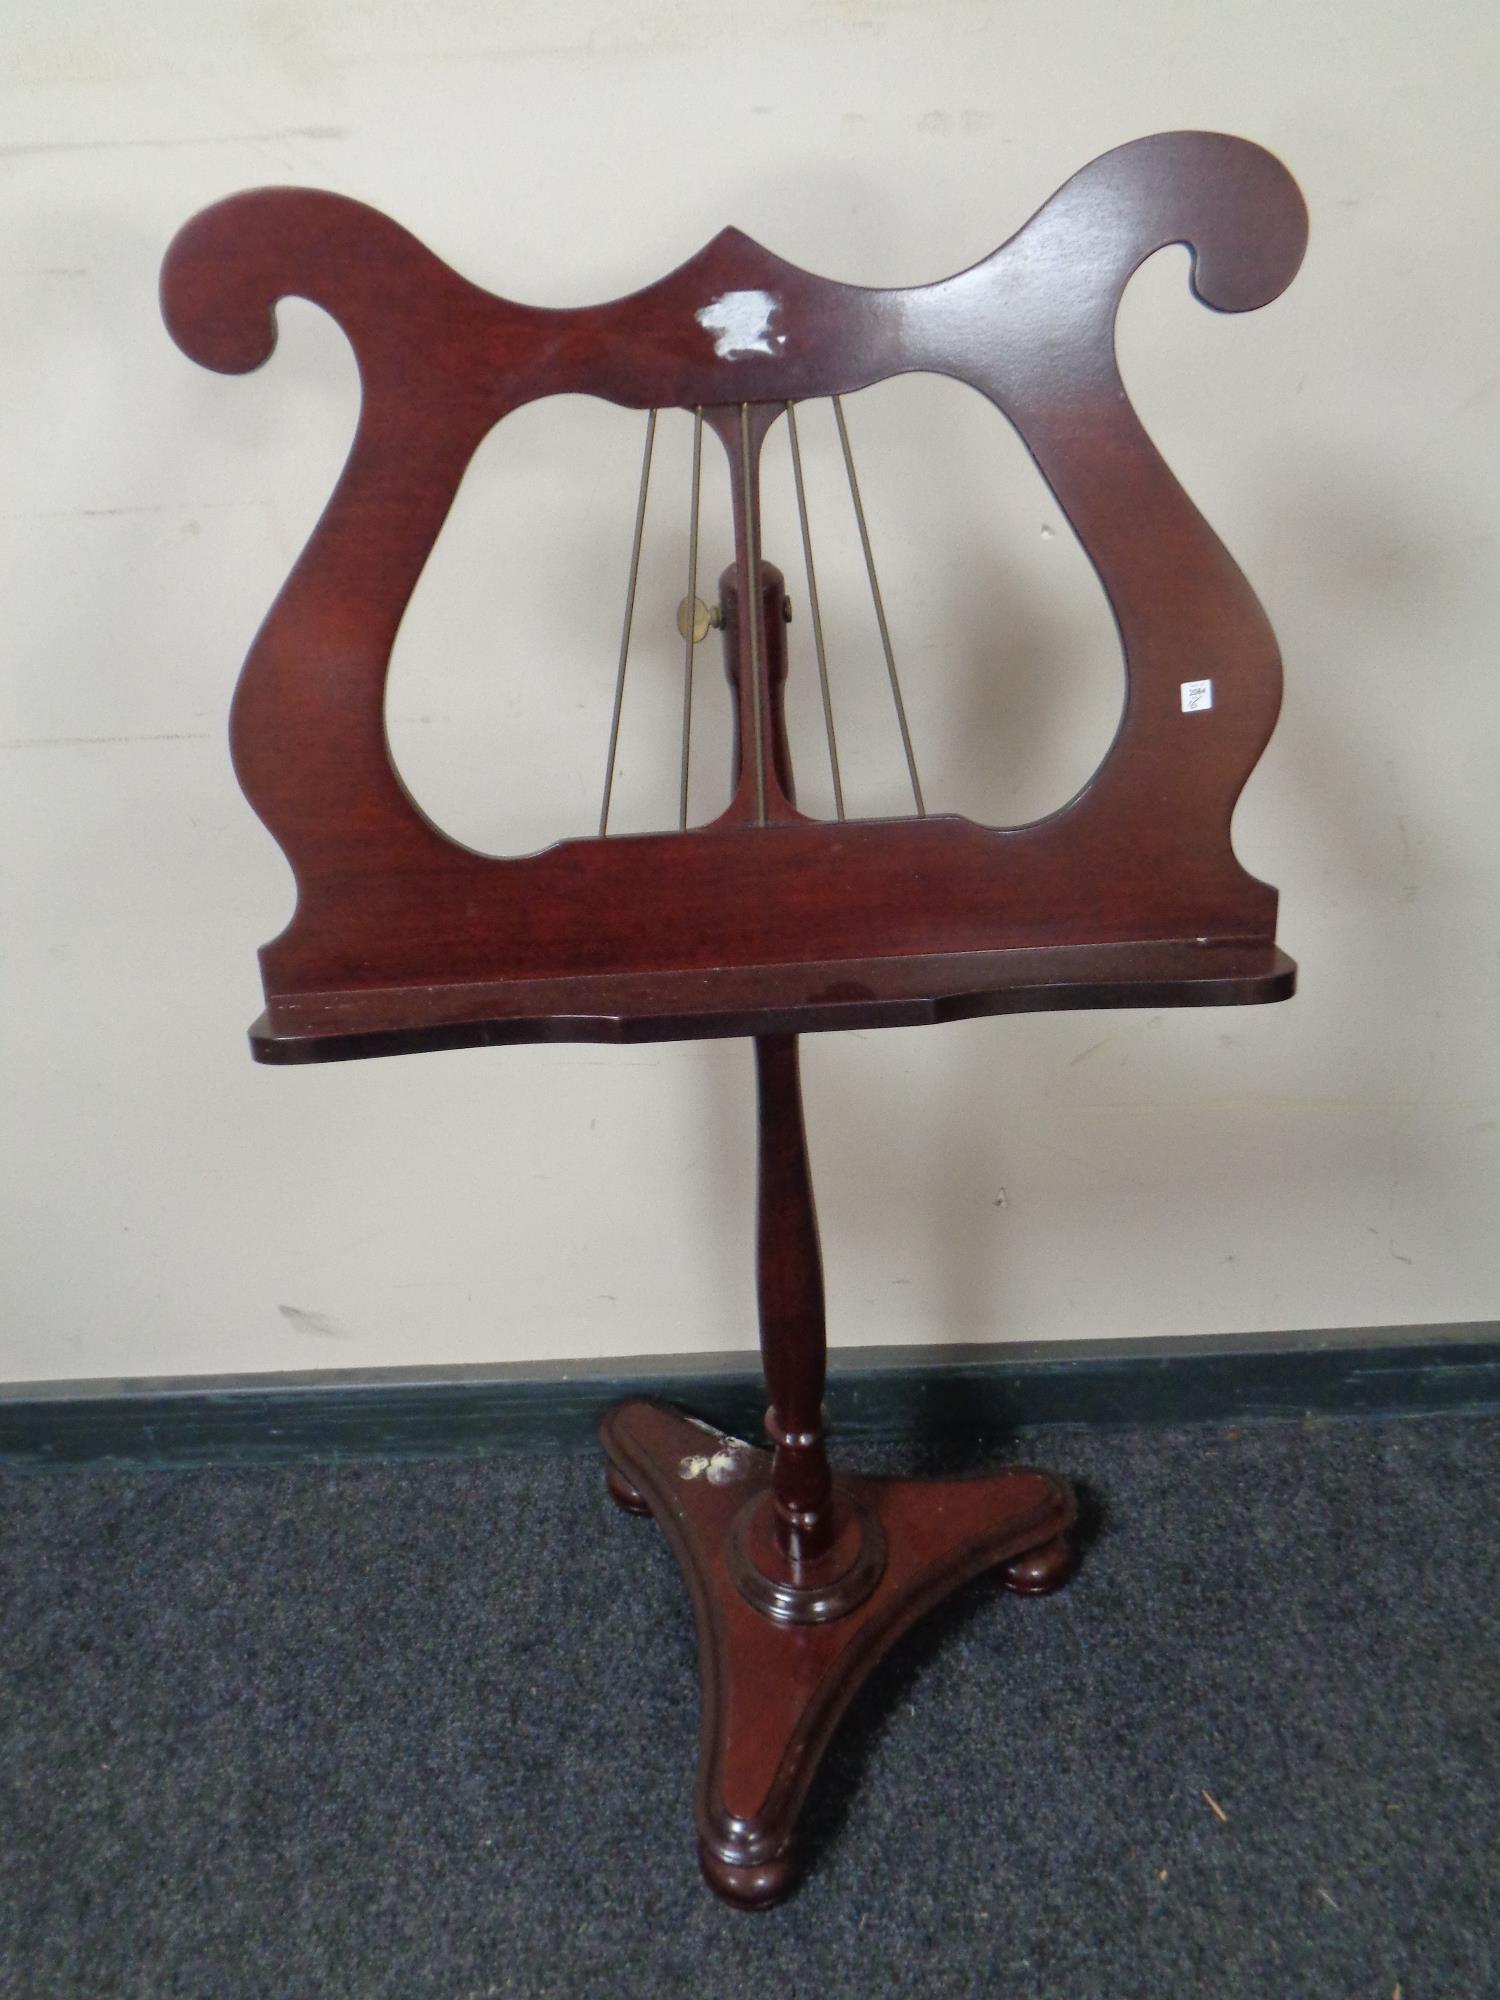 An adjustable lyre music stand